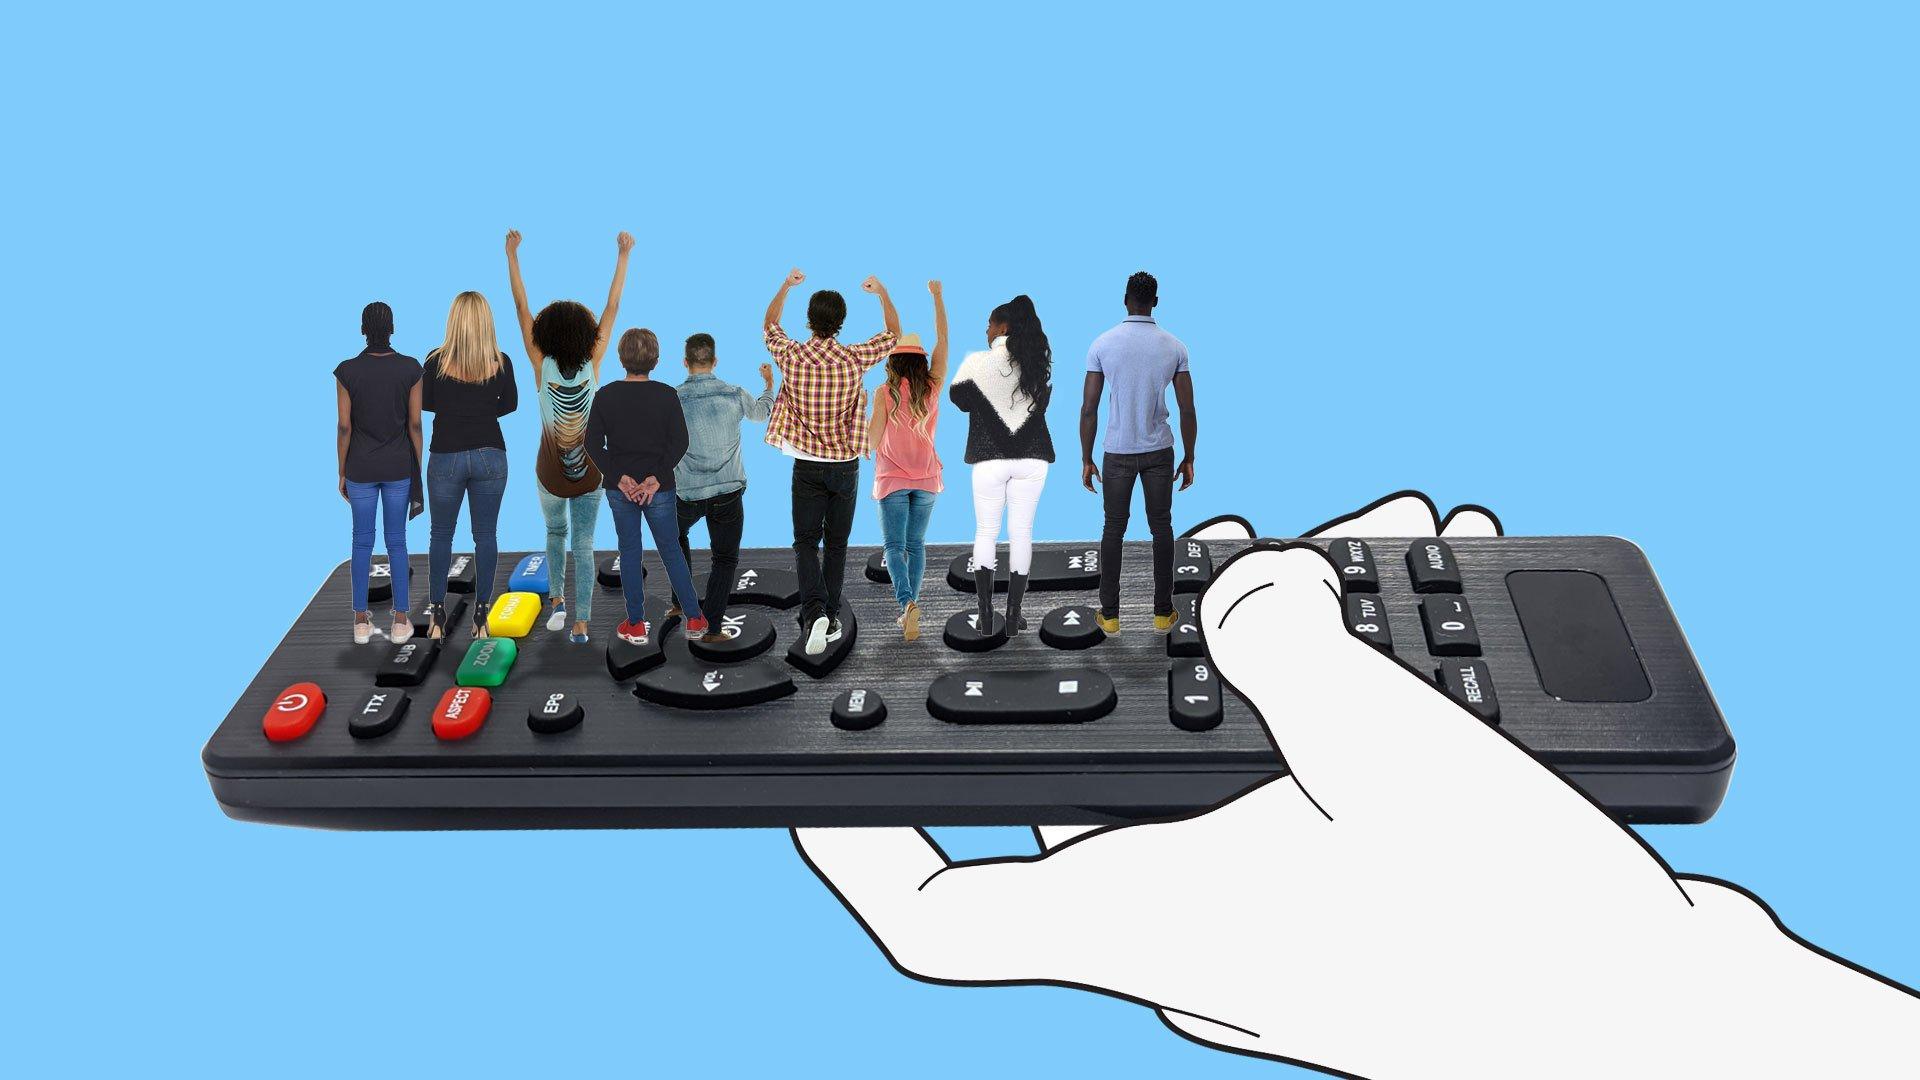 A group of people stand back facing on a remote that's held up by a hand against a blue background